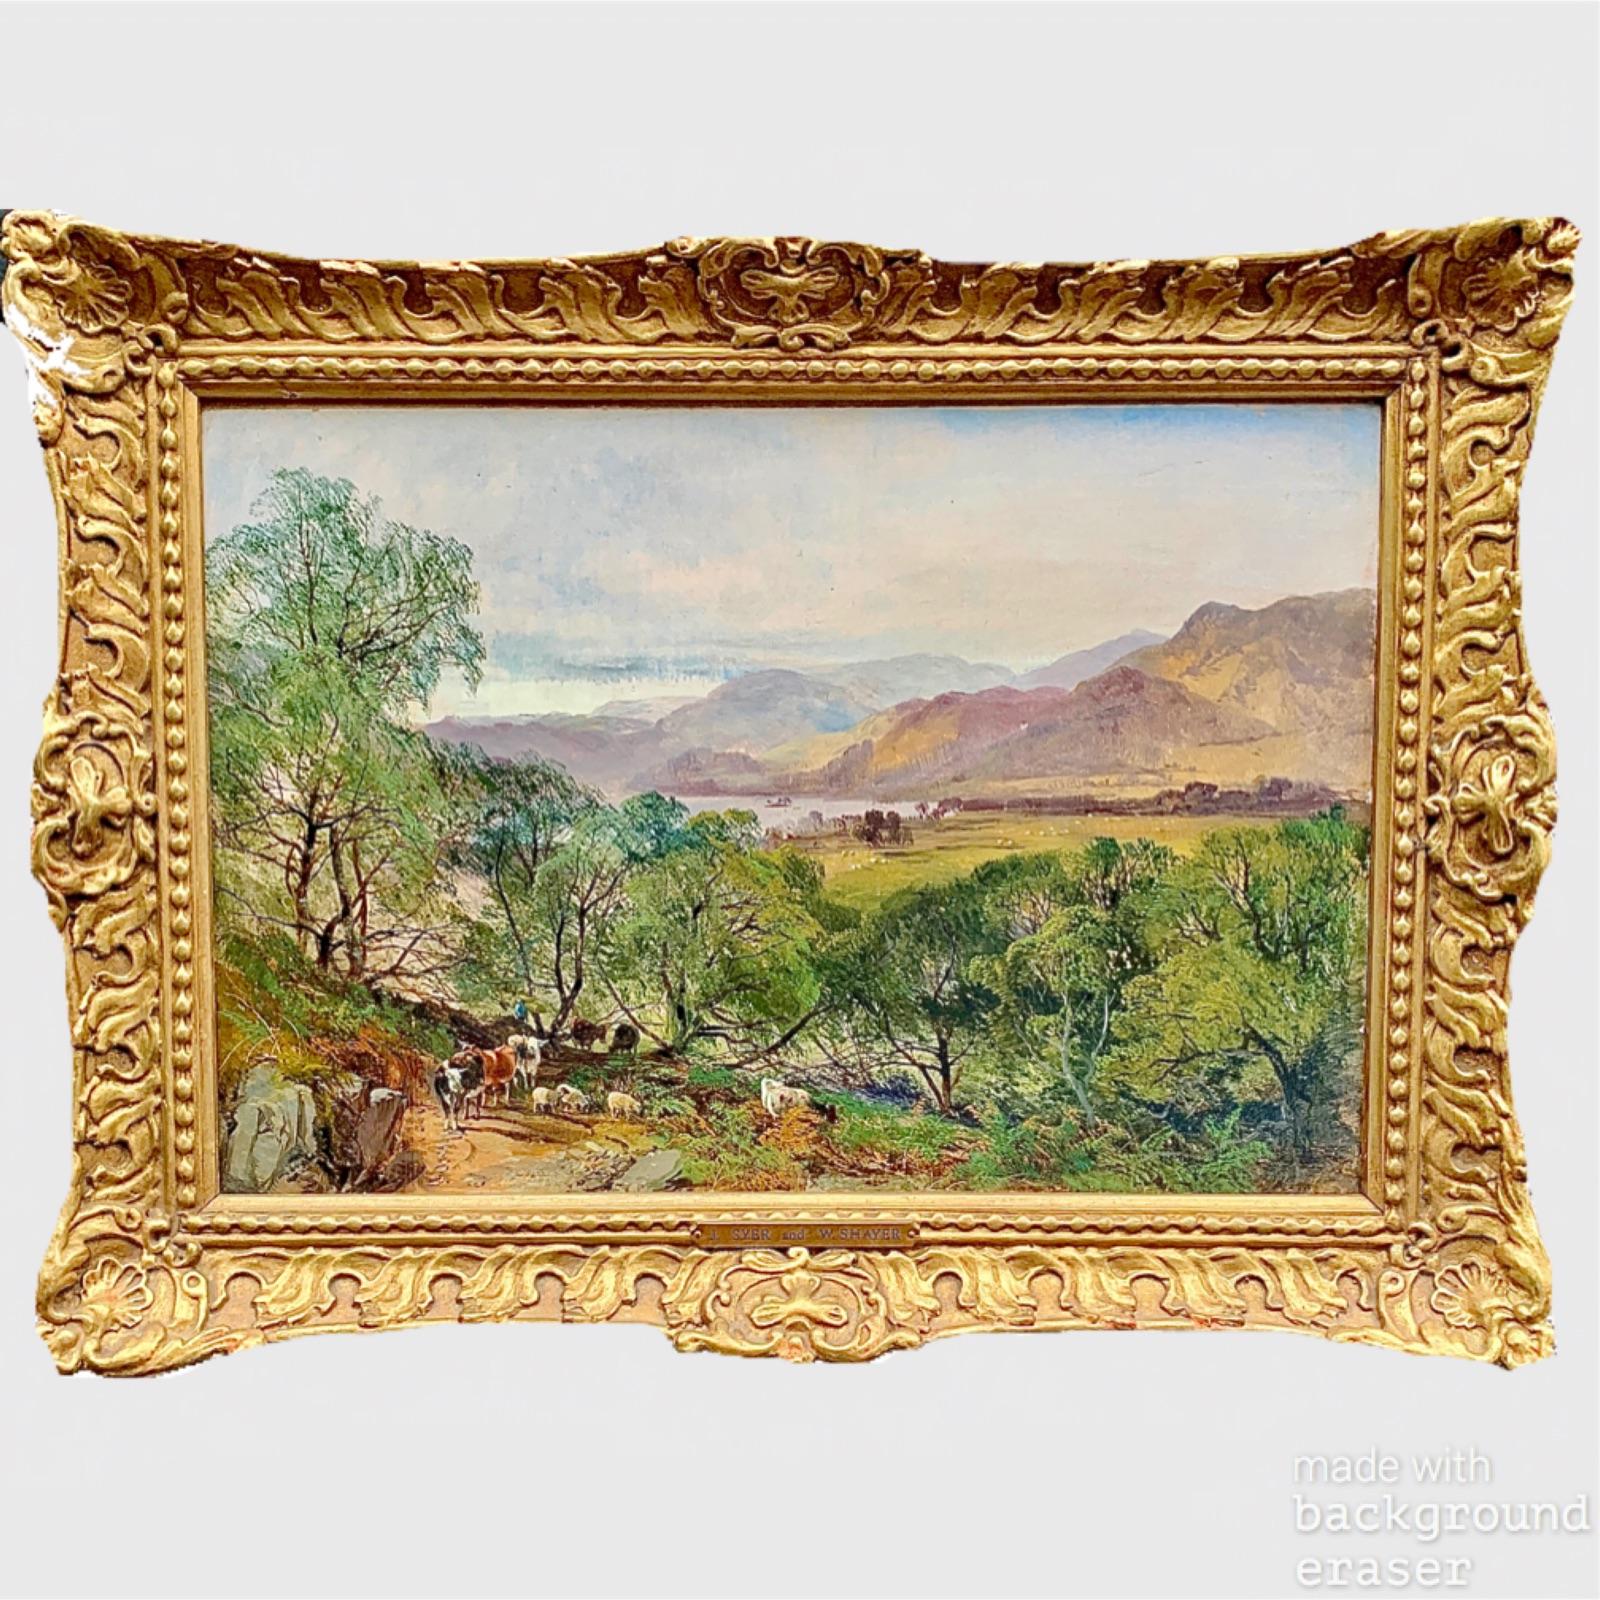 John Syer Figurative Painting - 19th century English antique oil landscape with cows, trees, lakes and mountains